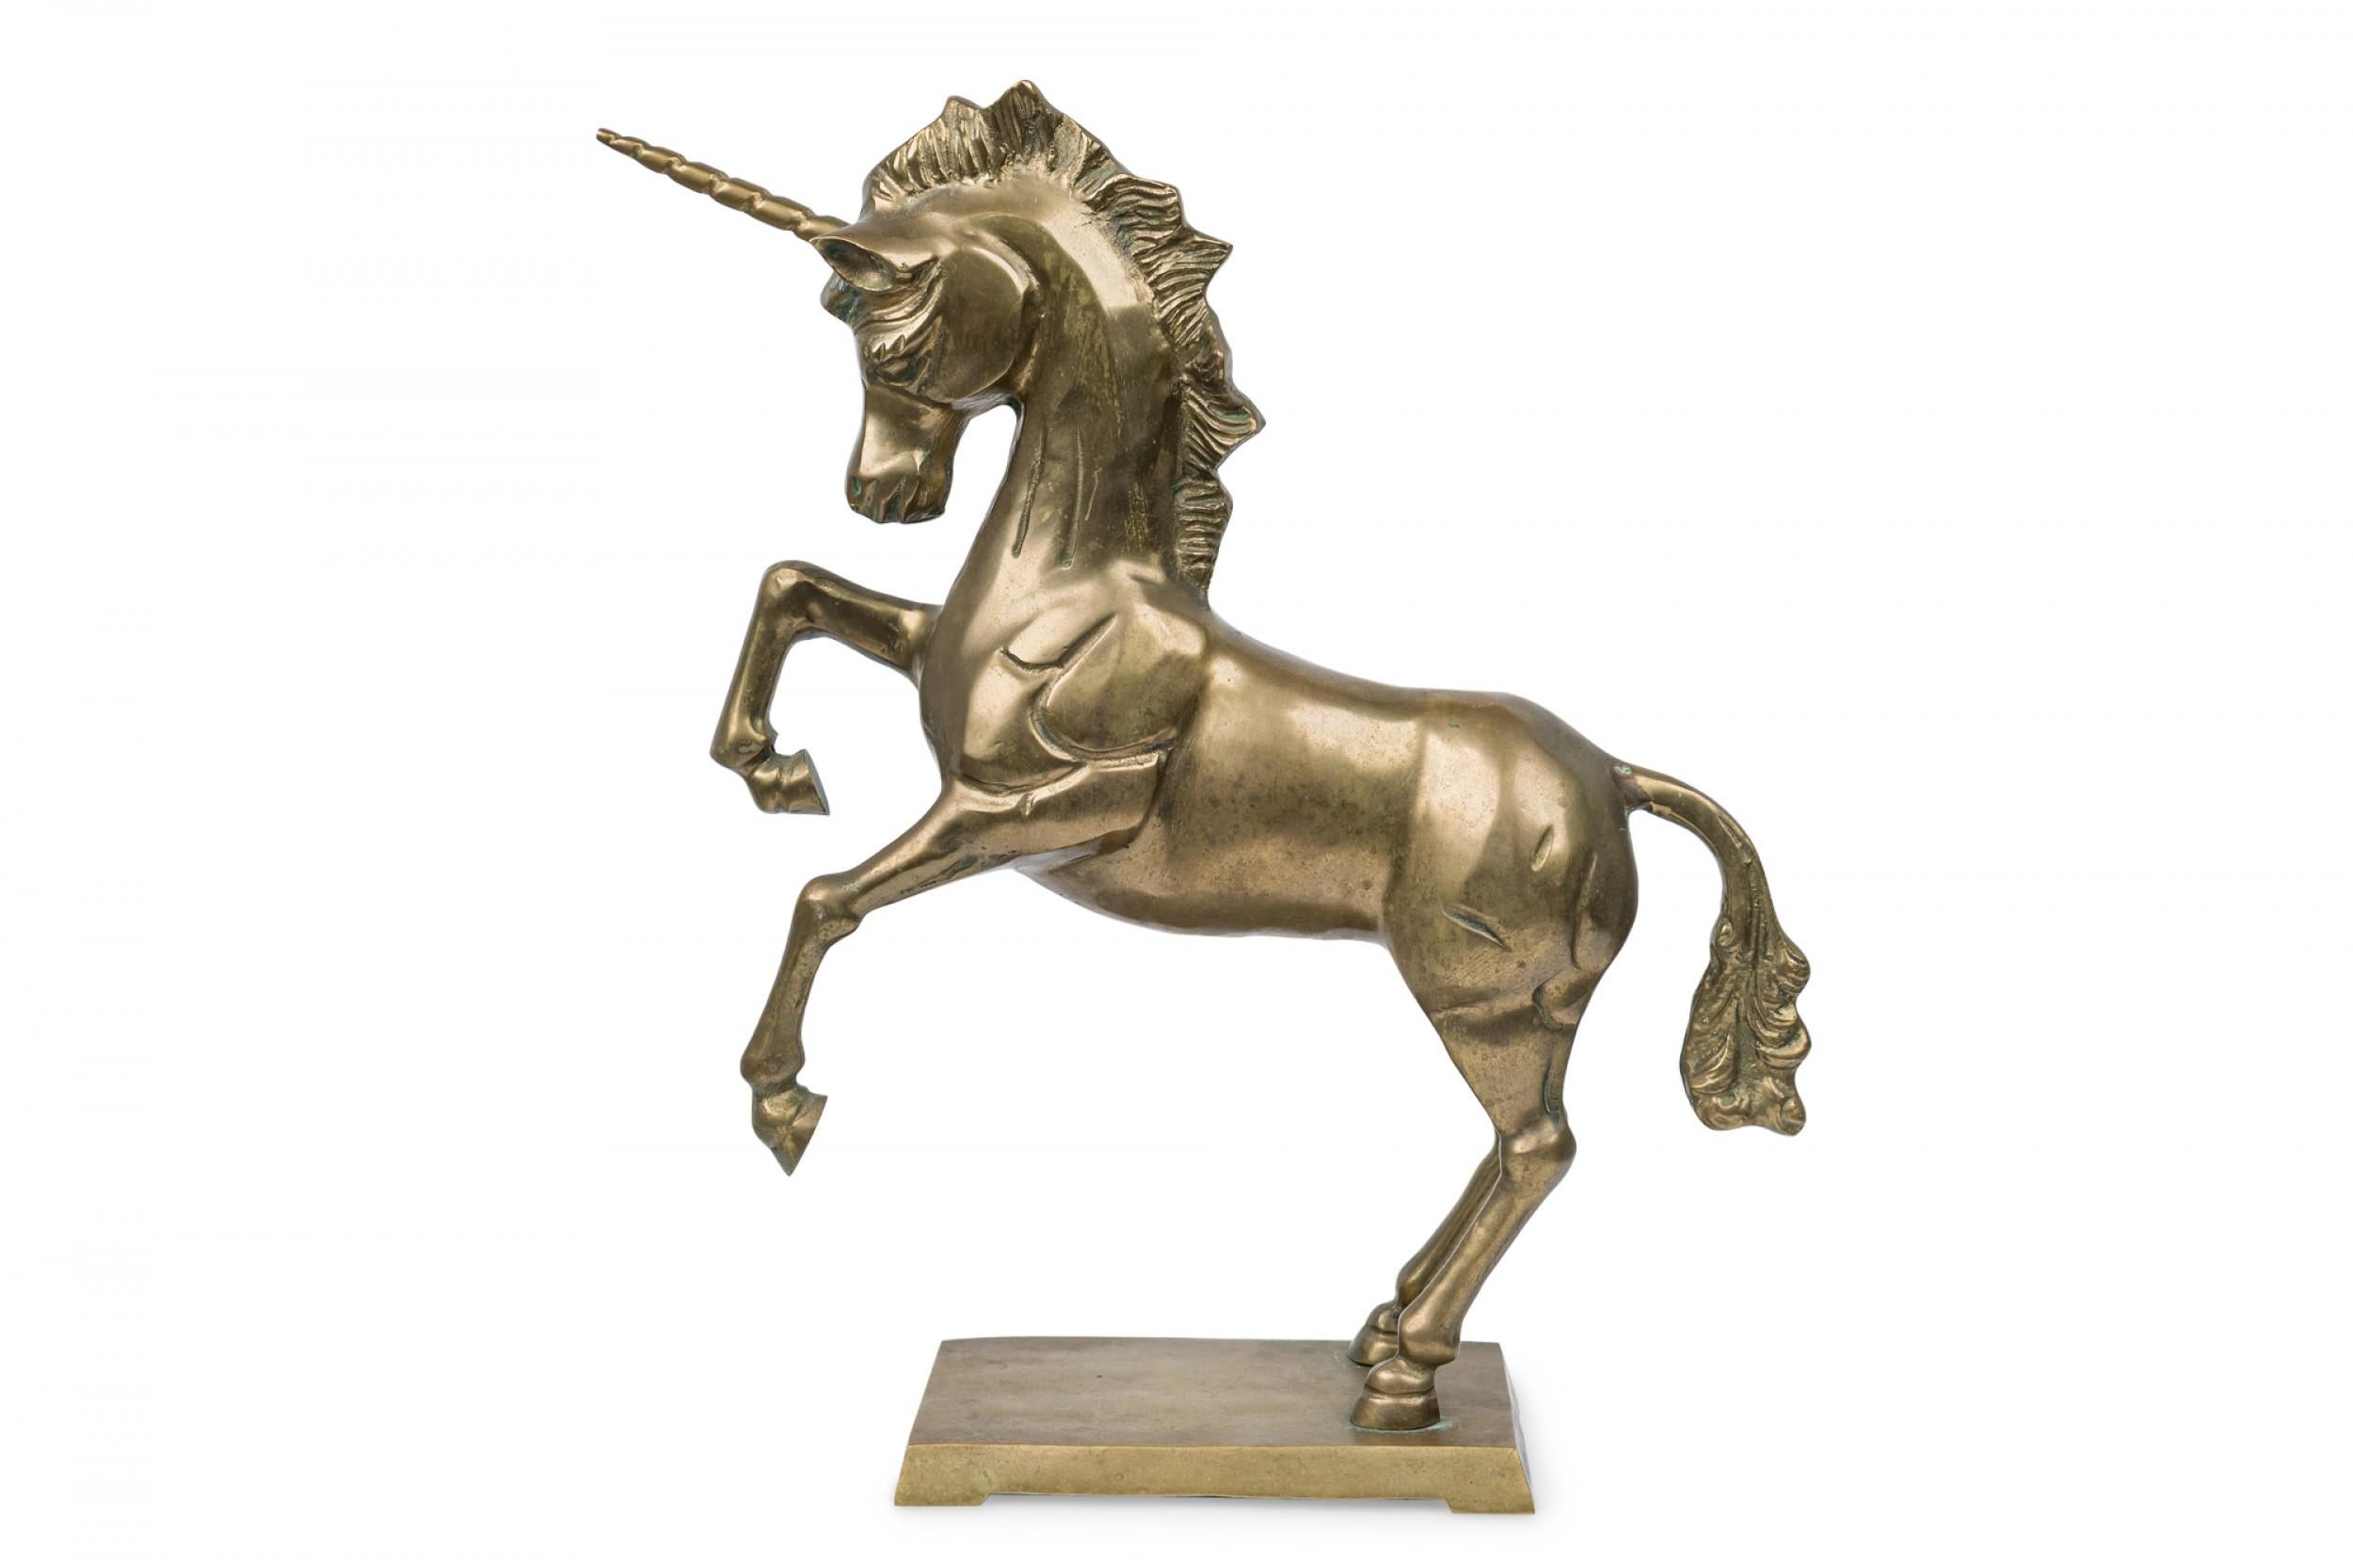 Midcentury American Modern brass sculpture depicting a unicorn in realistic style standing on its hind legs, supported on a flattened square base.